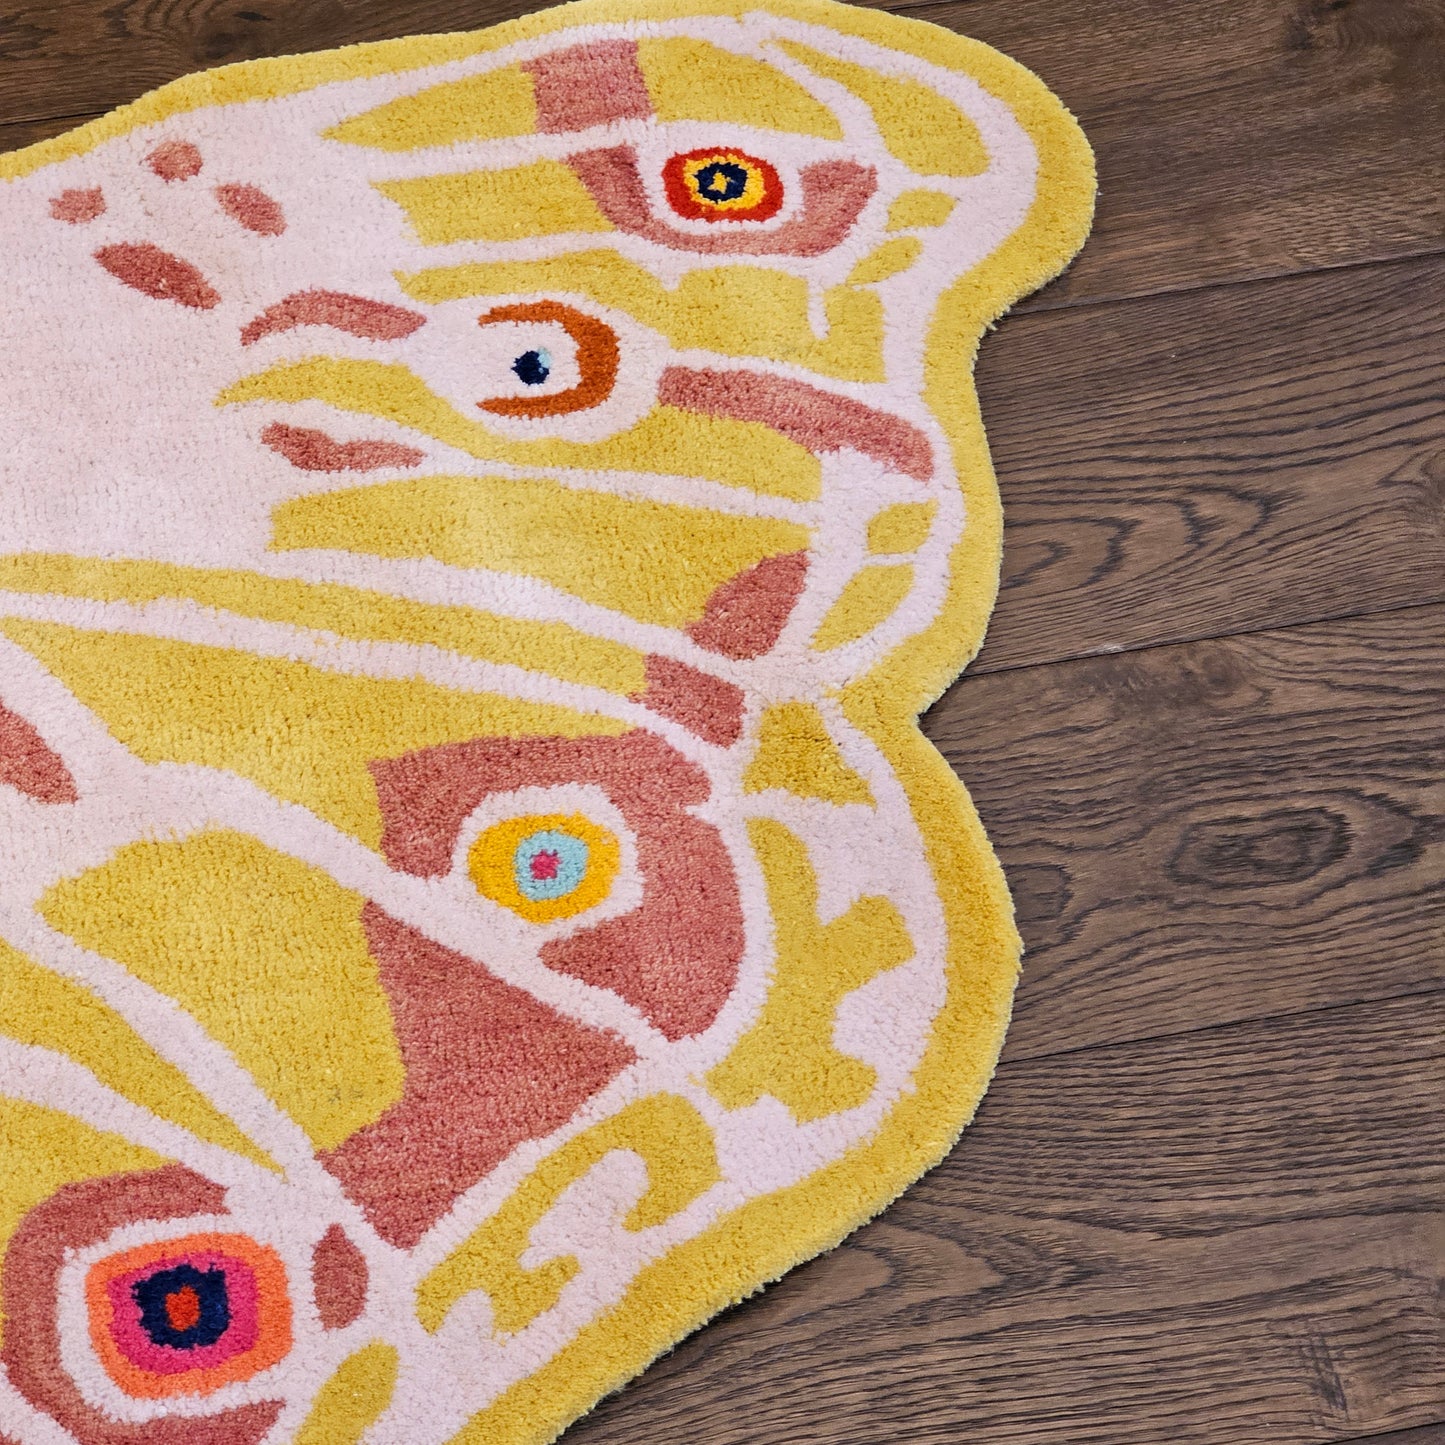 100% Wool Hand Tufted Butterfly Rug / Carpet ~ 5' x 2' 9"